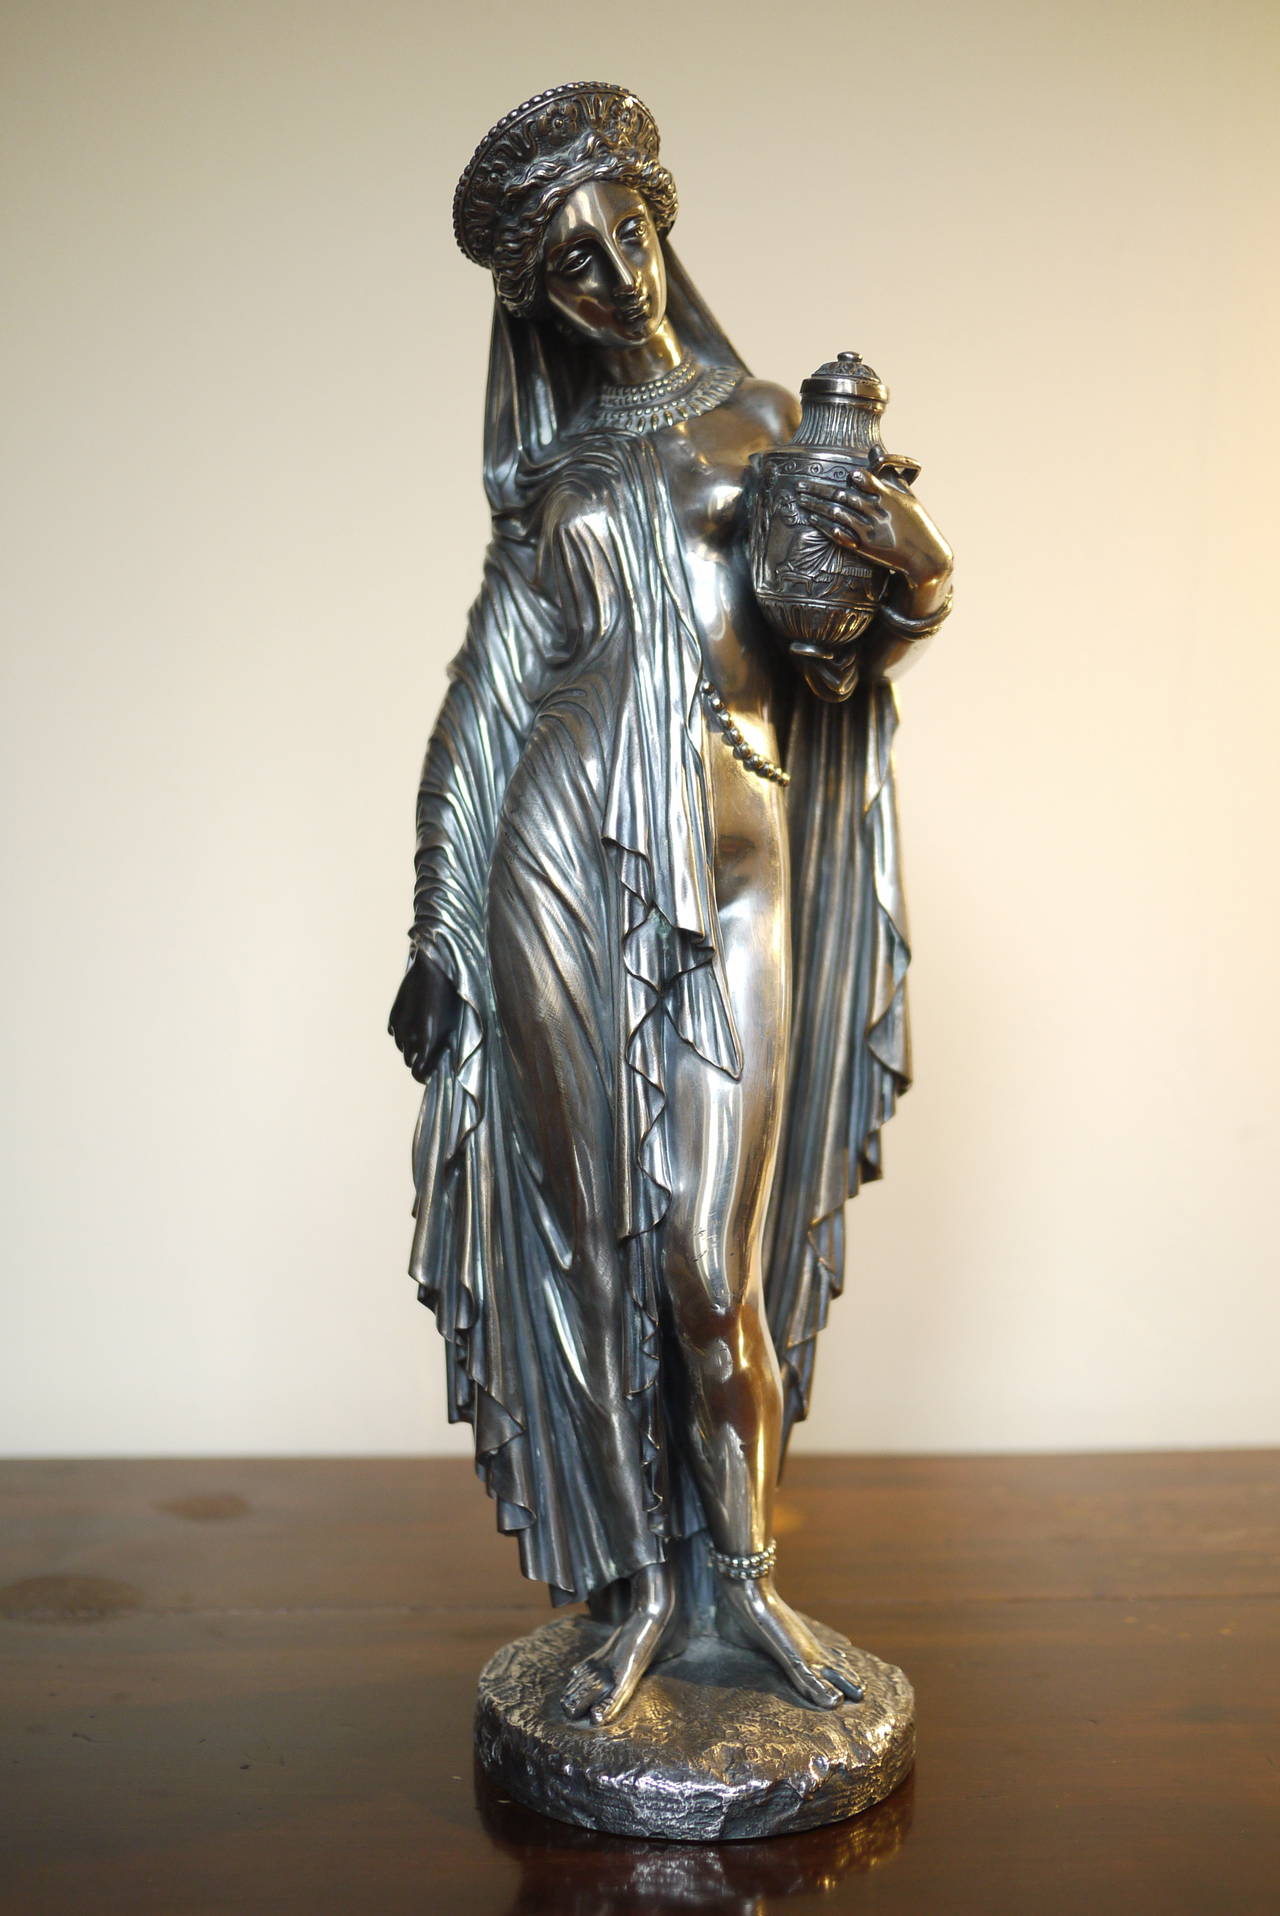 A fine French silvered bronze of Pandora by Jean-Jacques Pradier, the maiden shown standing, partially draped and richly bejewelled , a relief-cast urn in her left hand, signed Pradier Scpt and inscribed E. de Labroue . Mid 19th Century.
Pradier's